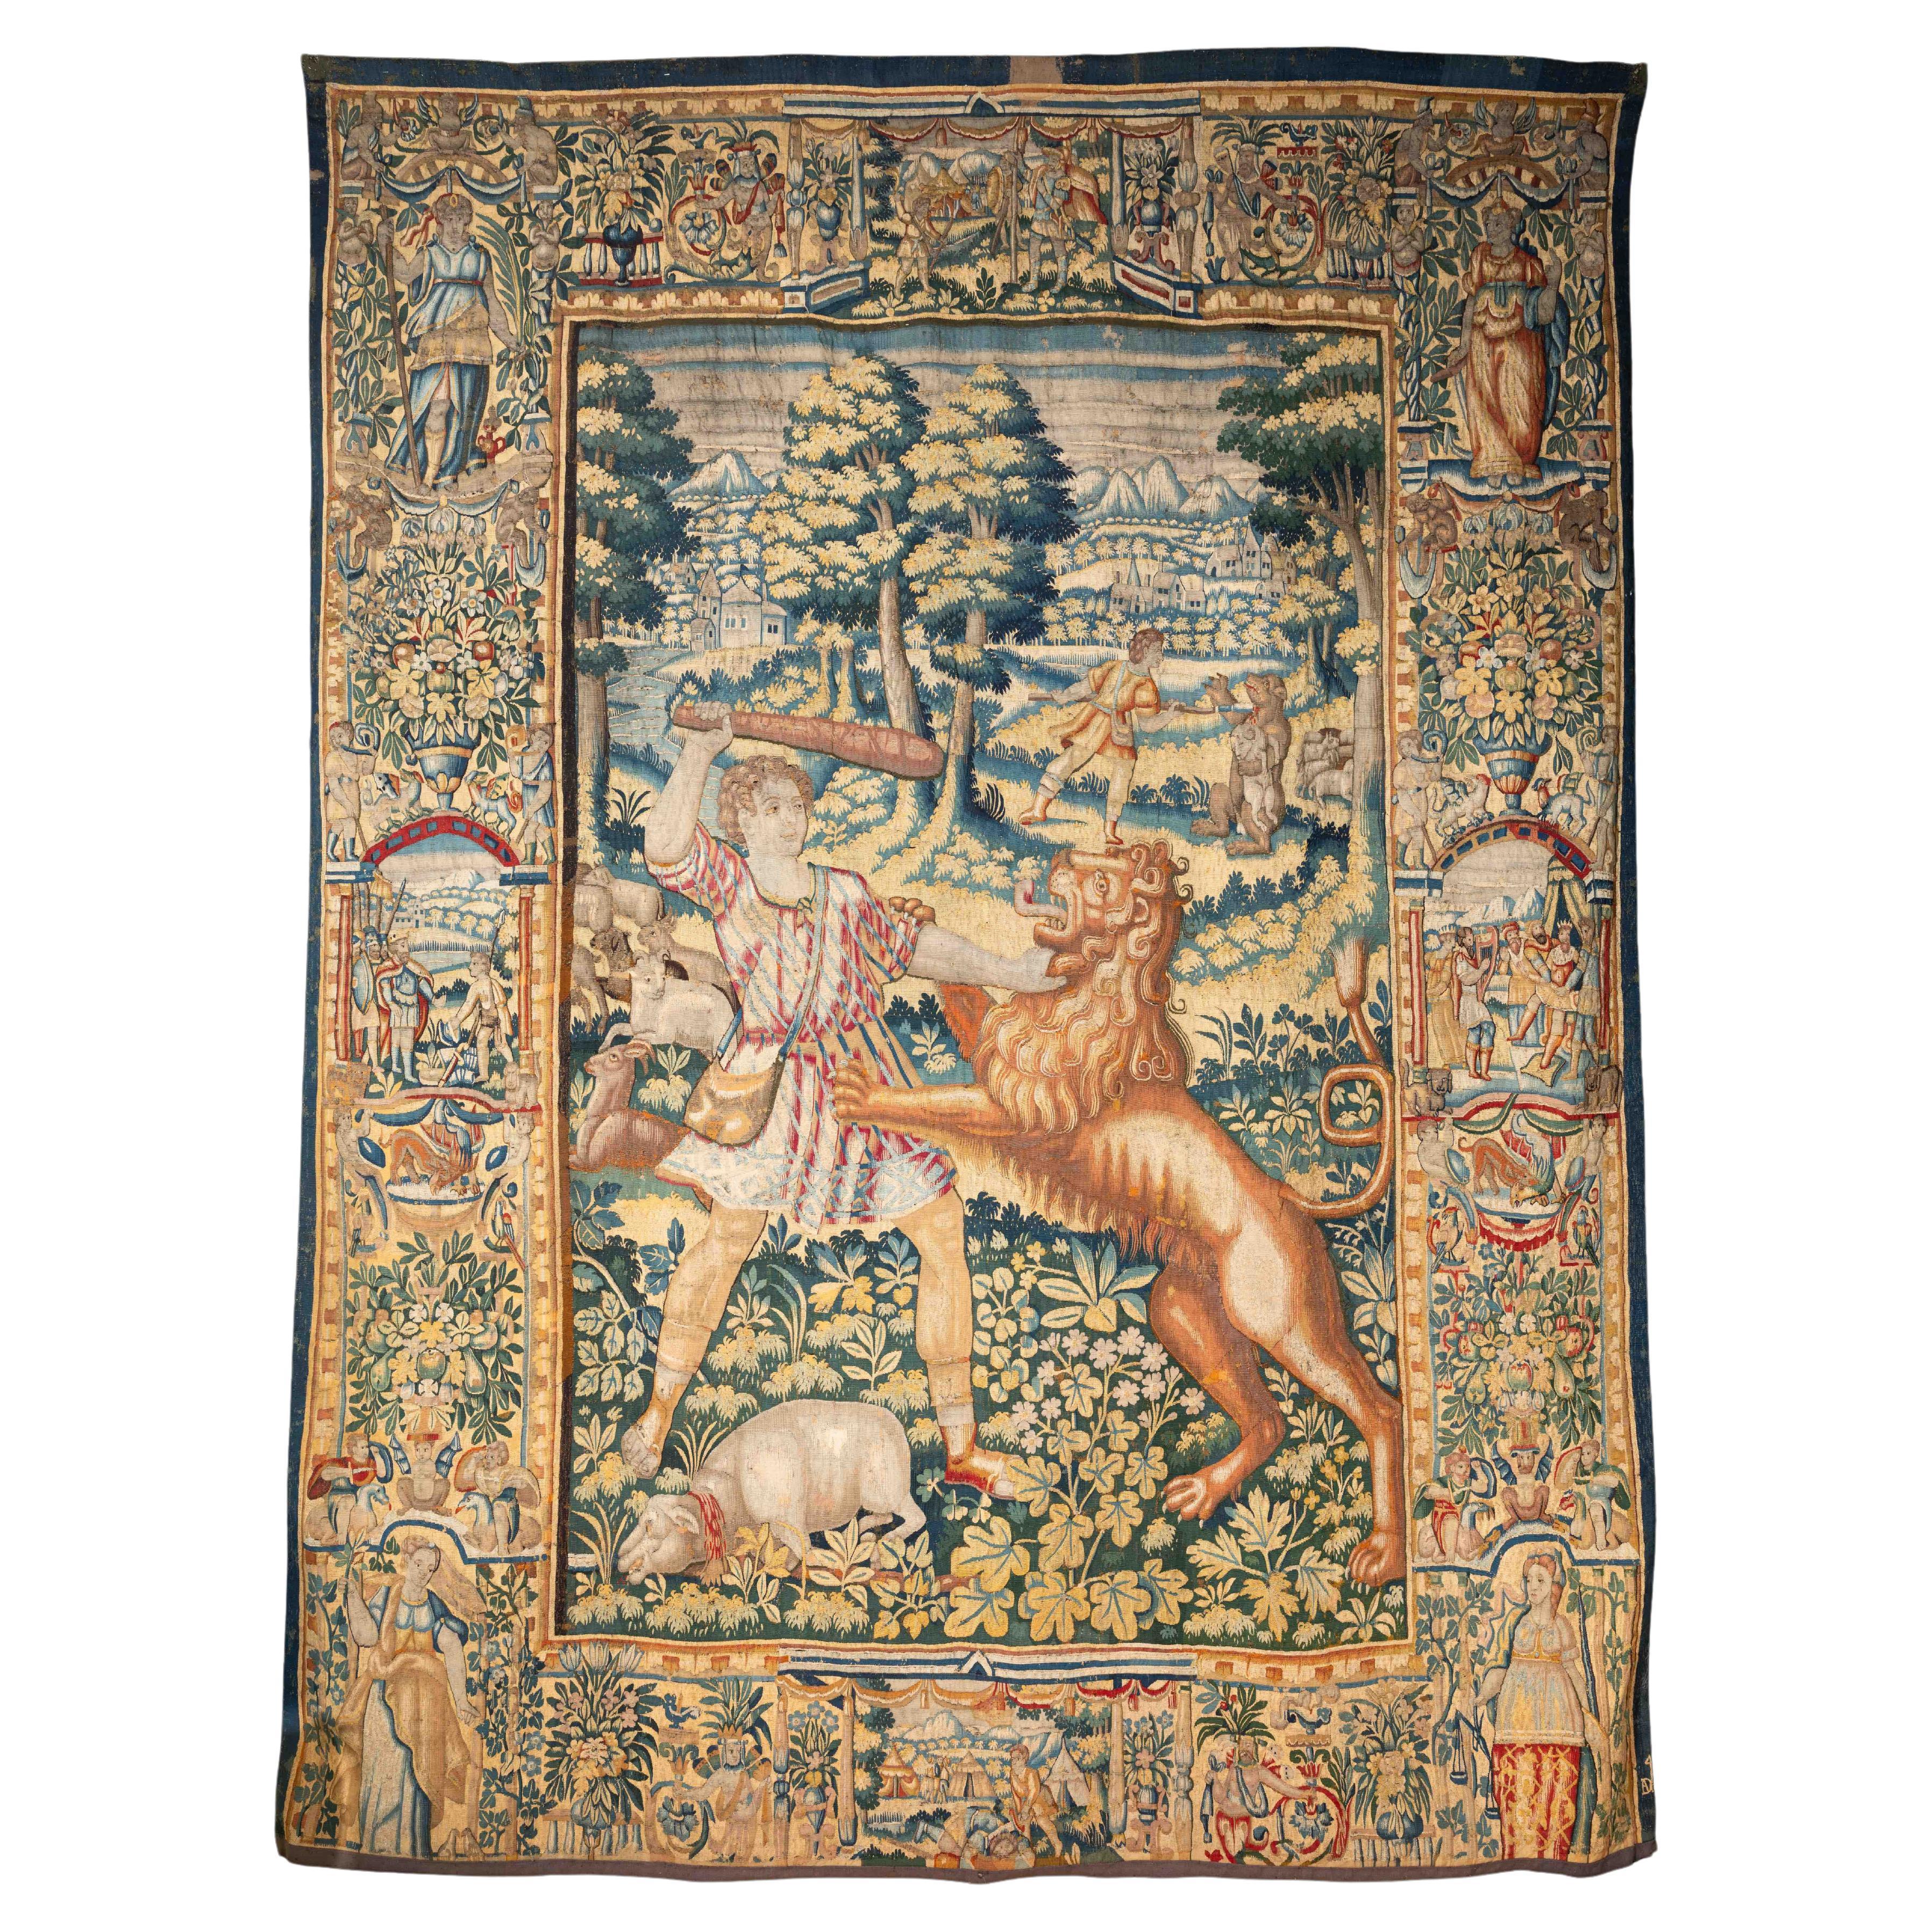 16th century Brussels tapestry - The Story of David For Sale